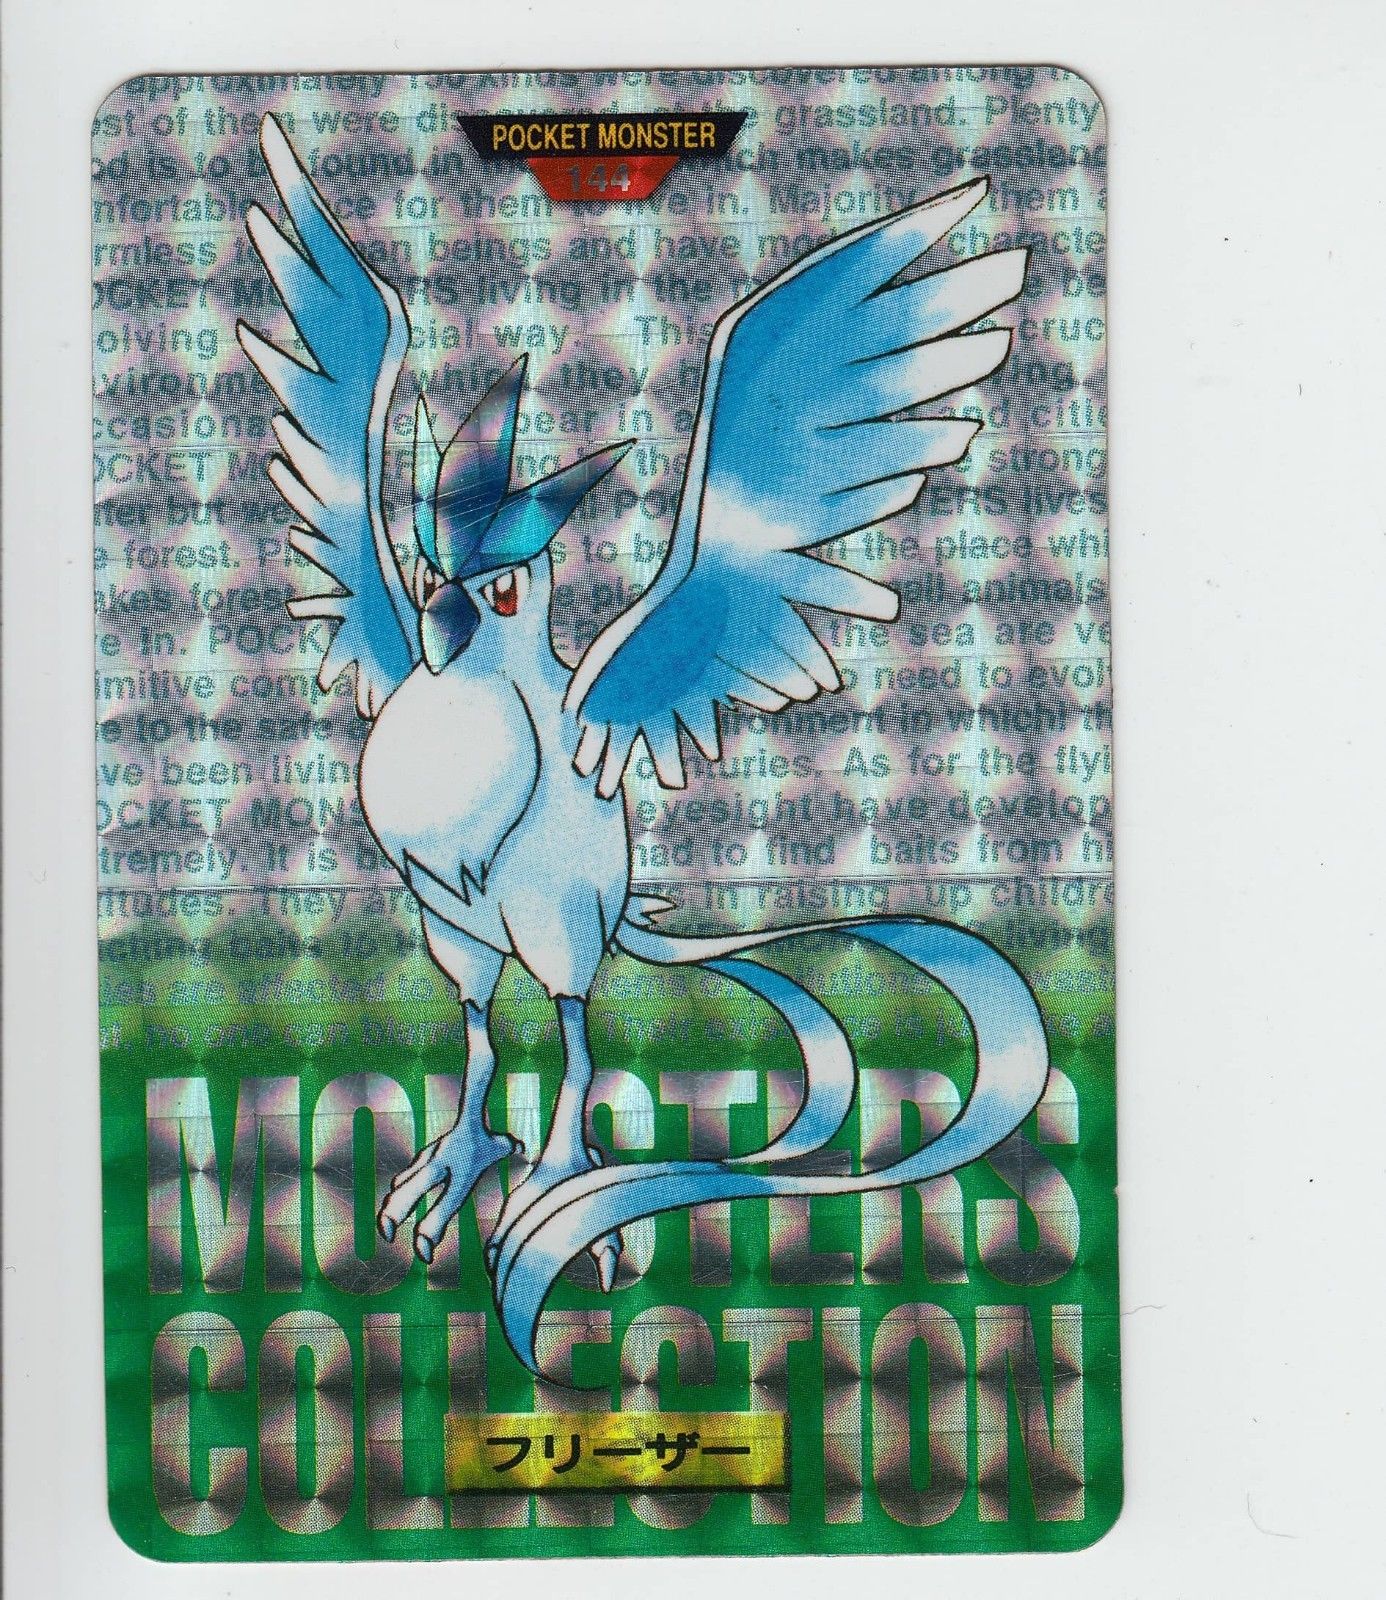 Pokémon by Review: #144: Articuno